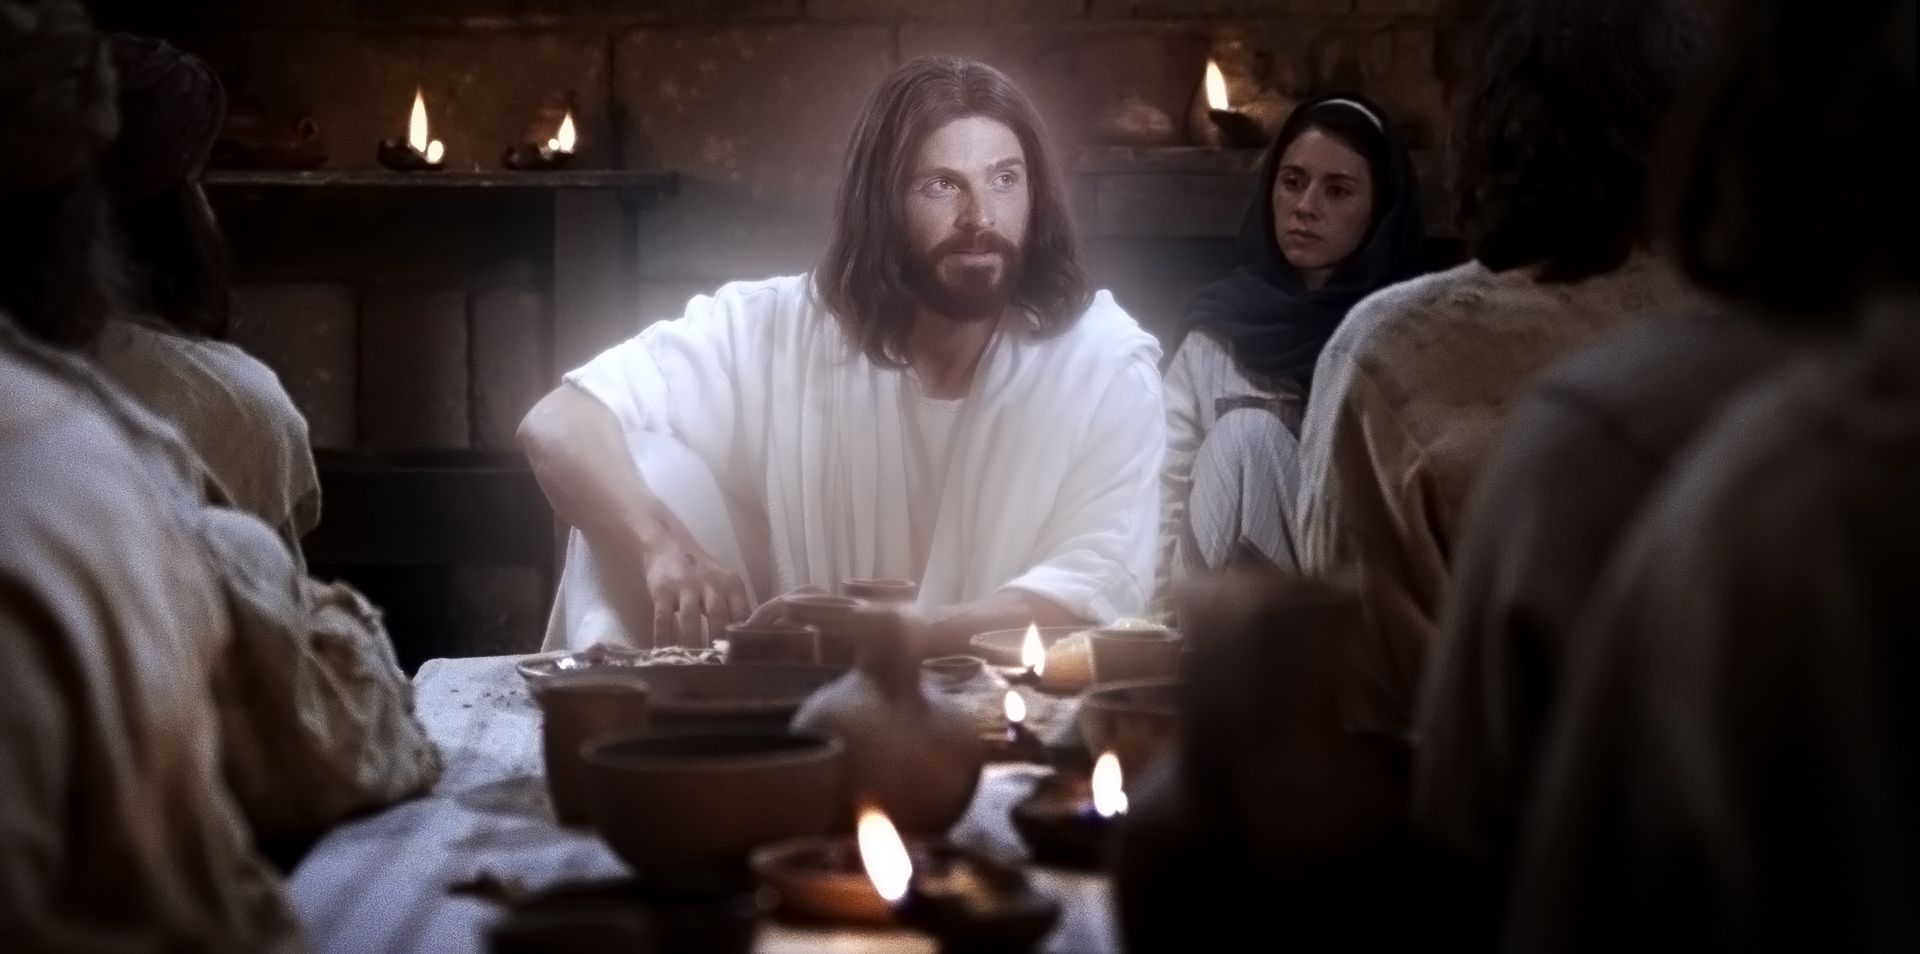 Jesus Christ sits with and teaches His Apostles and disciples after He is resurrected.